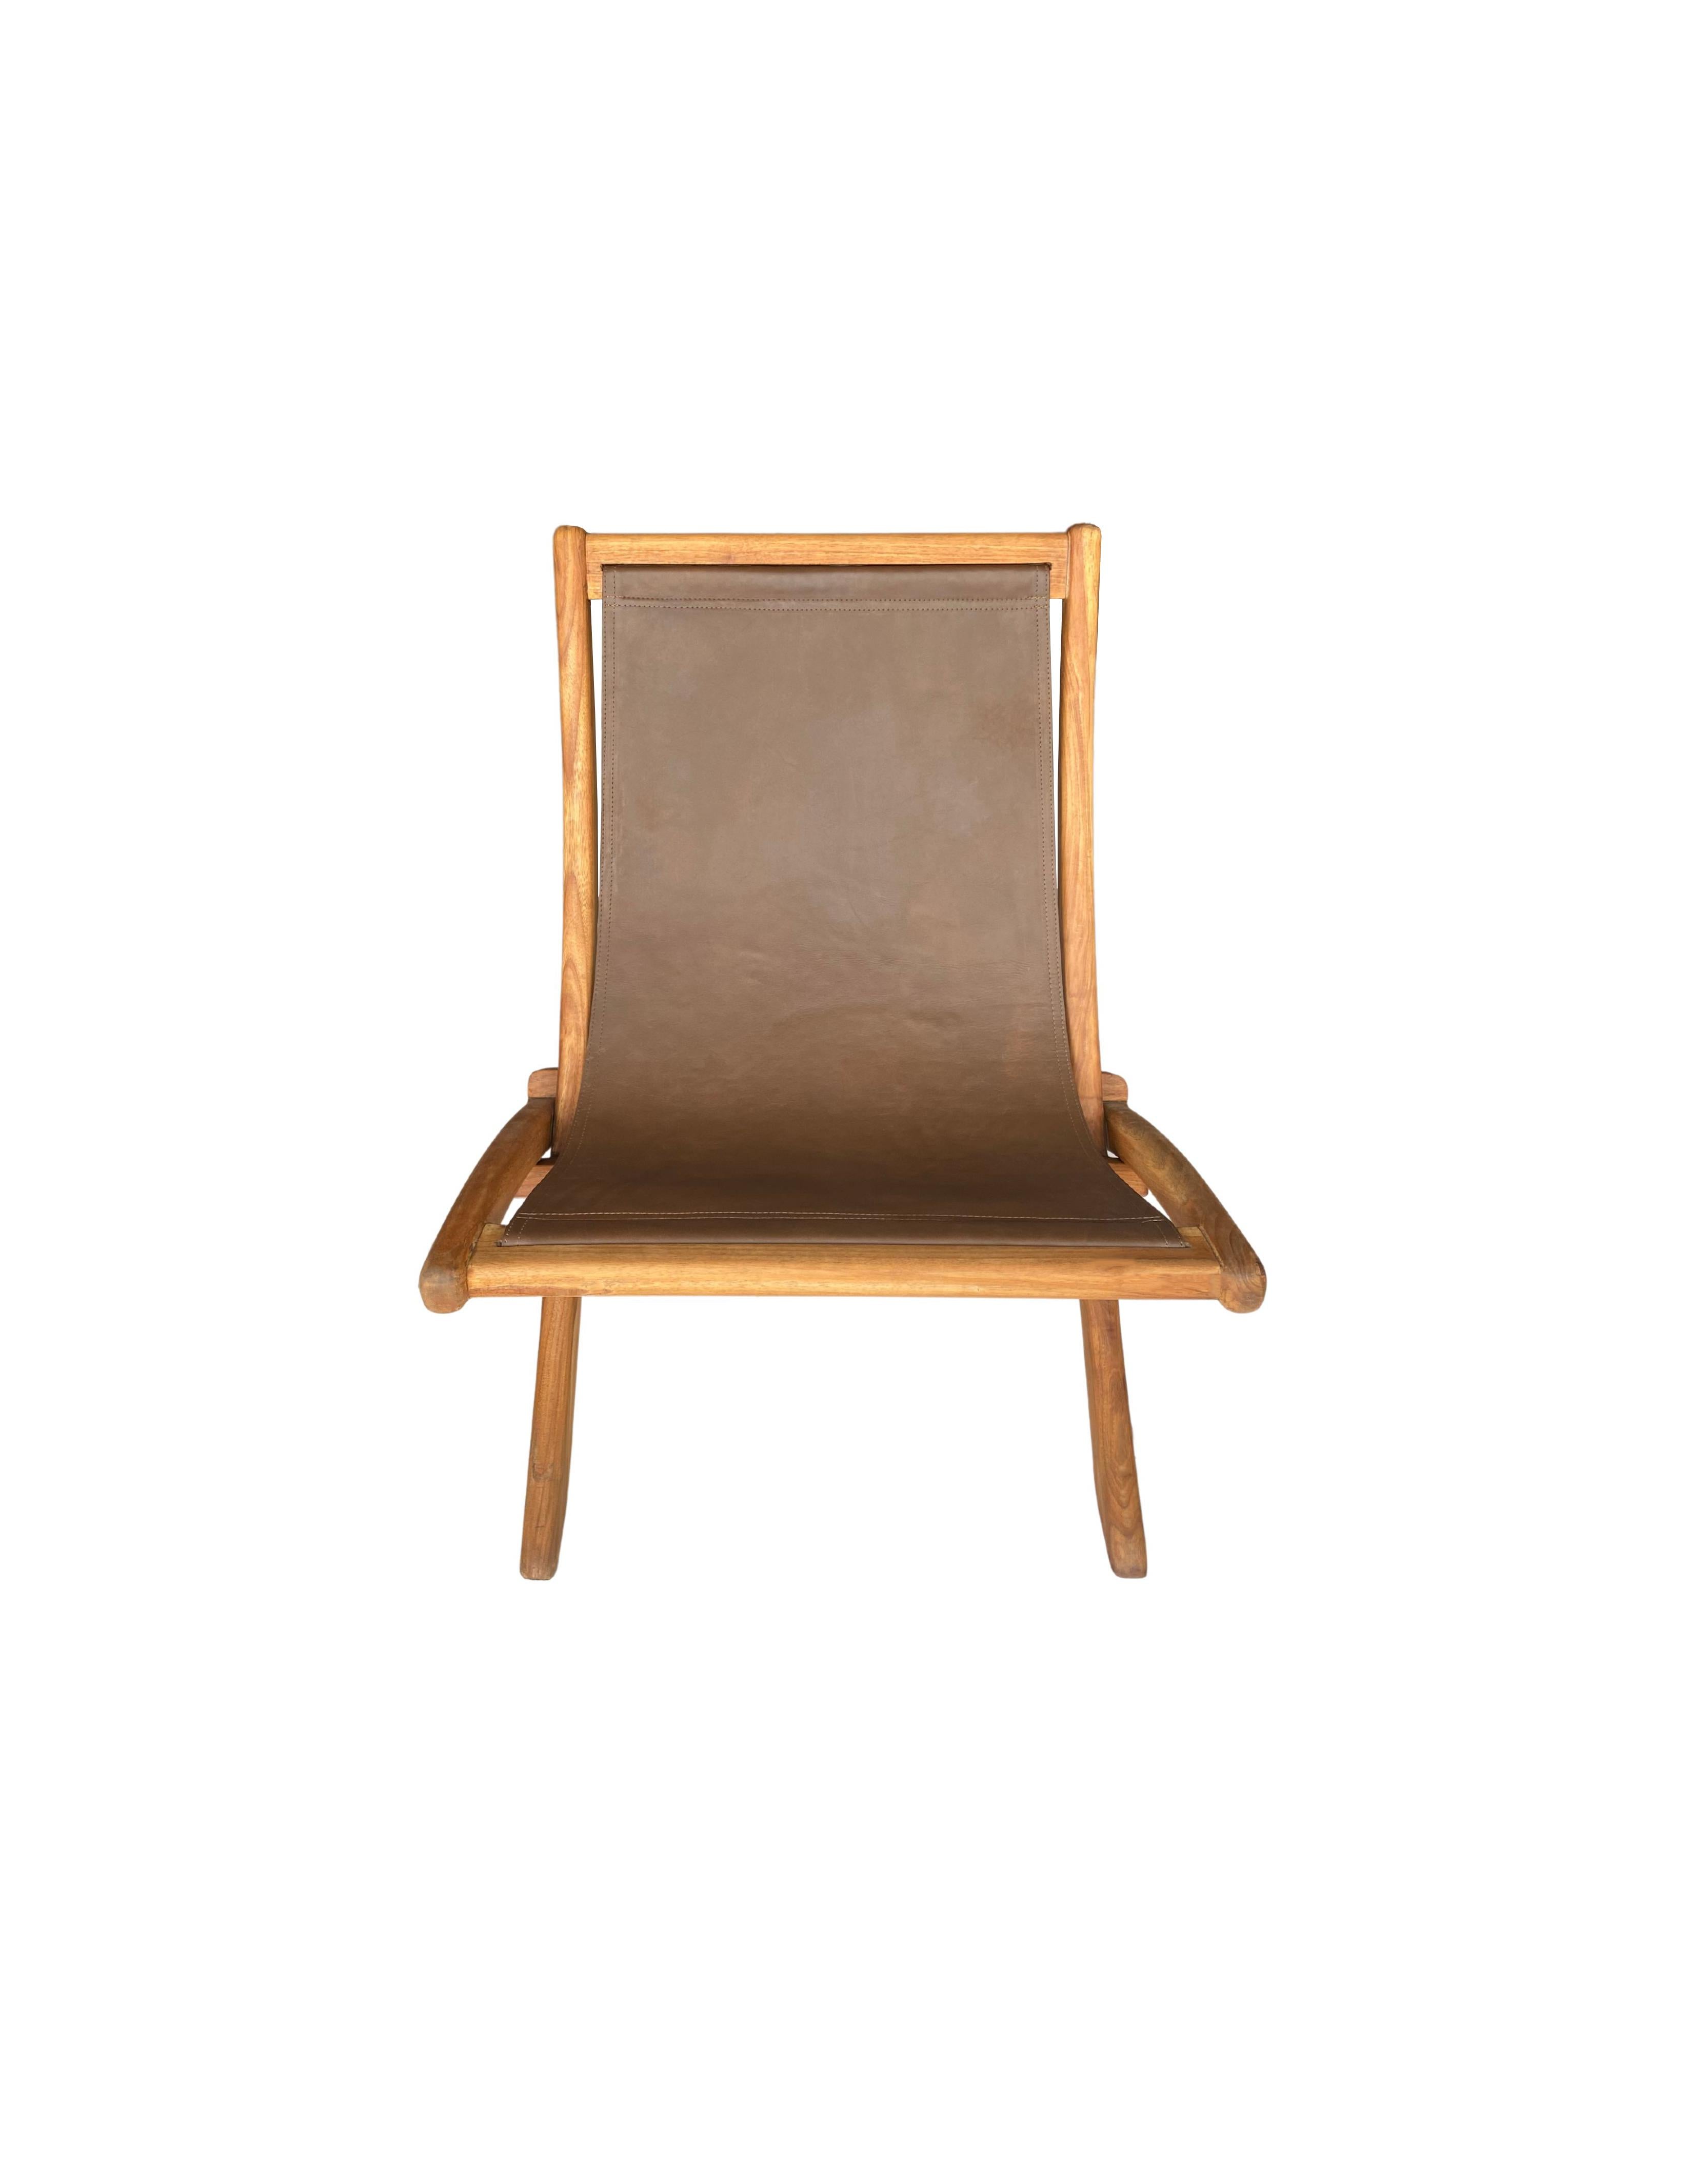 Modern Foldable Teak Wood Framed Lounge Chair, with Hanging Leather Seat